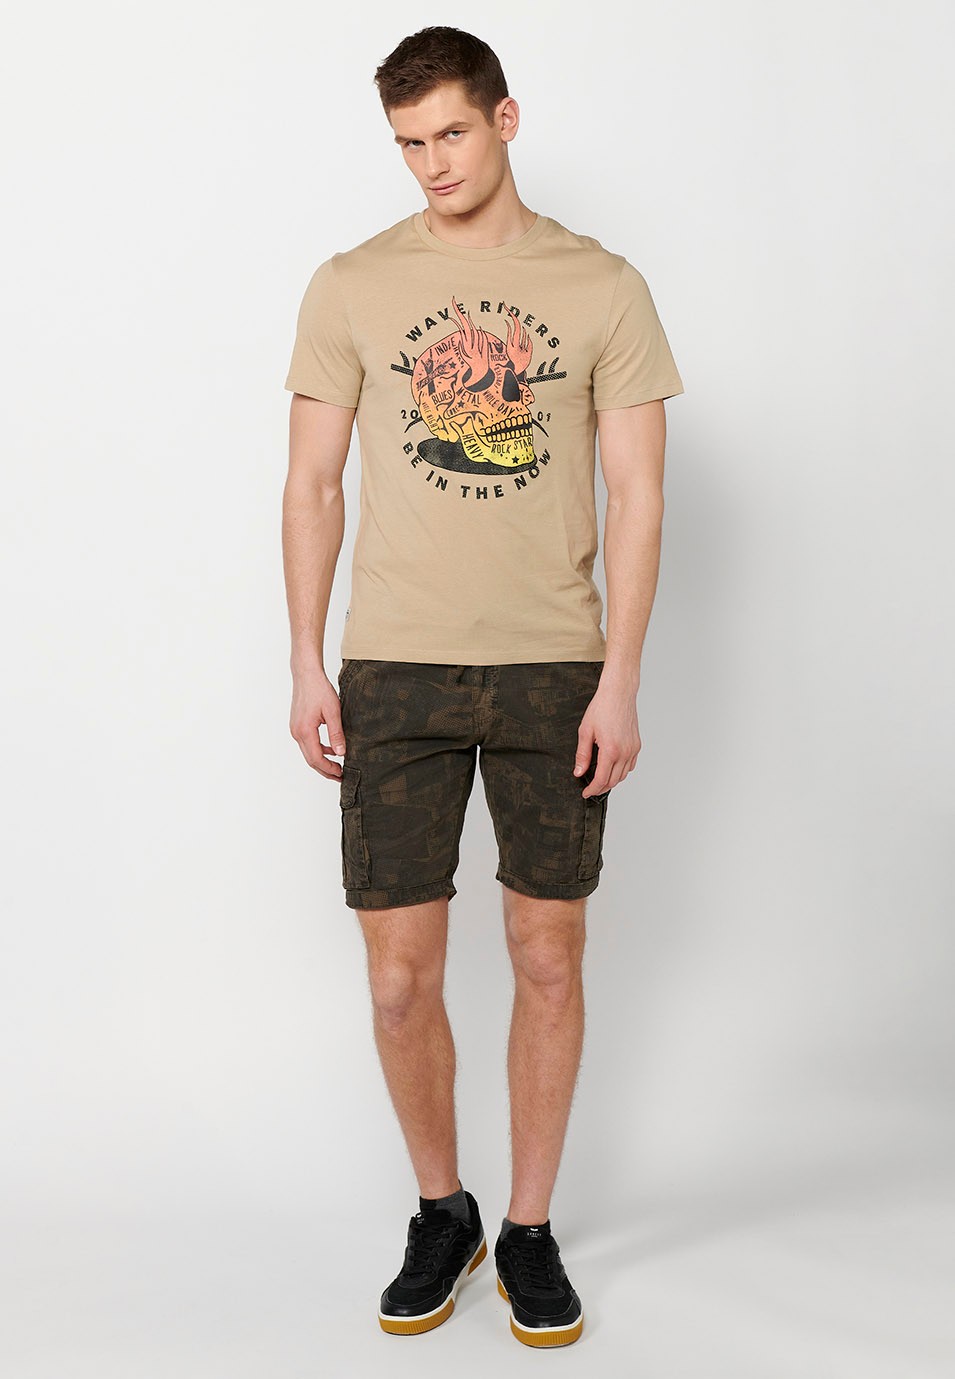 Stone-colored printed cotton short-sleeved t-shirt for men